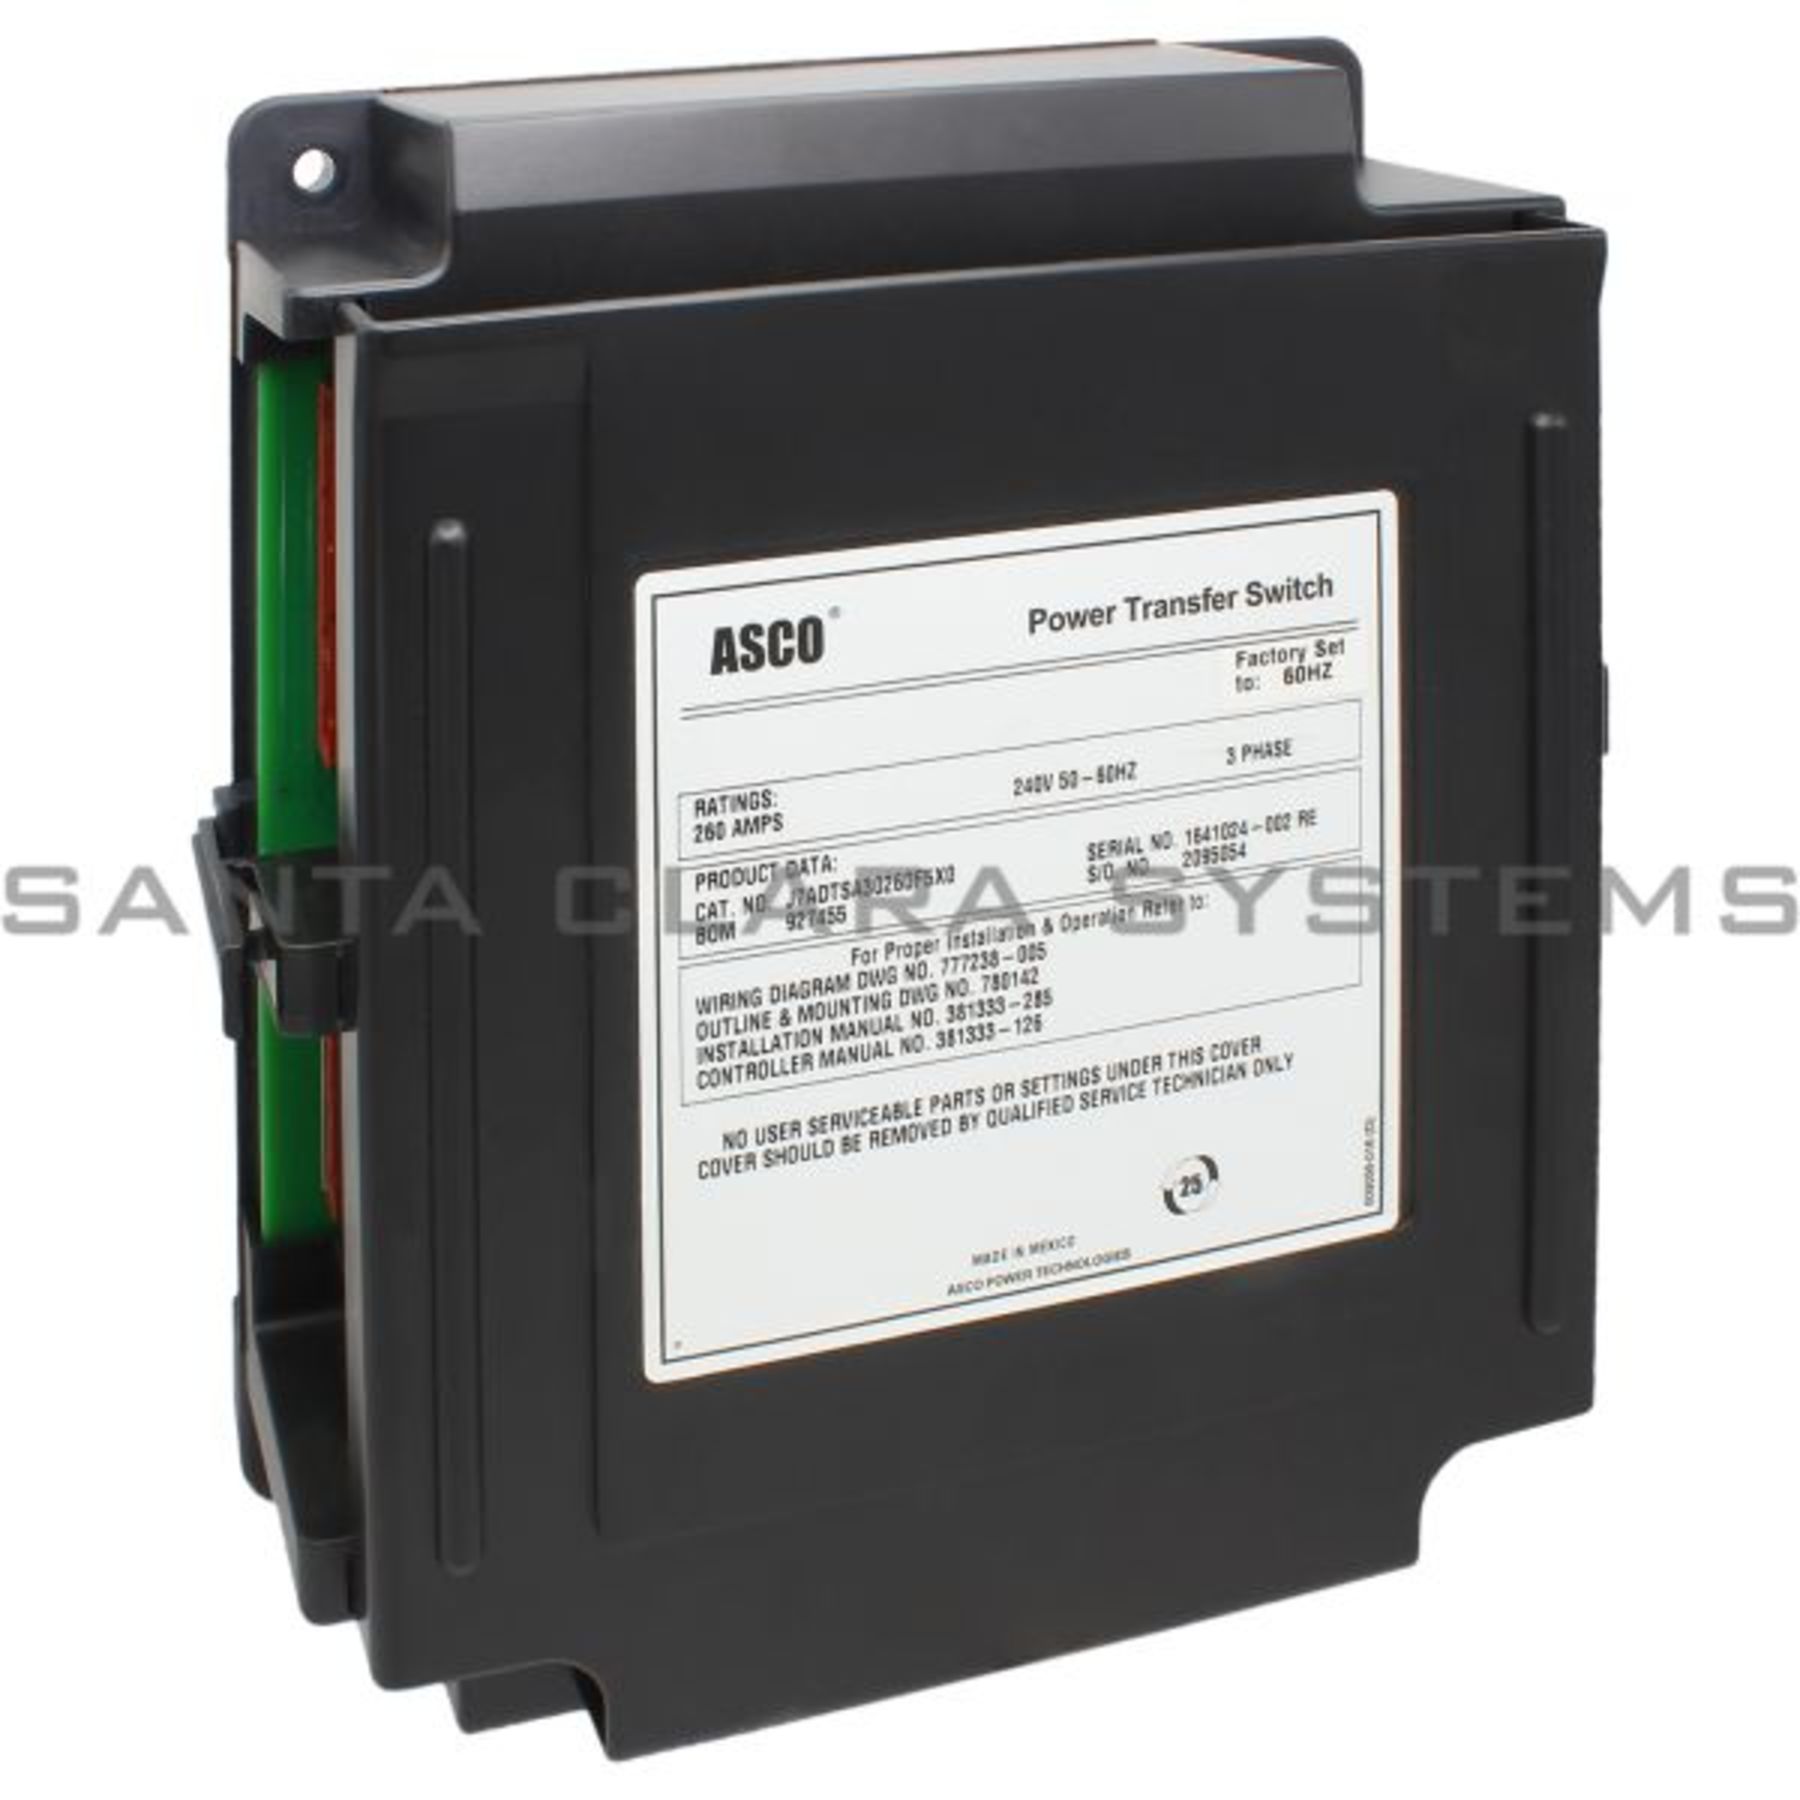 601800-002 Asco Control Box for Automatic Transfer Switch 7000 